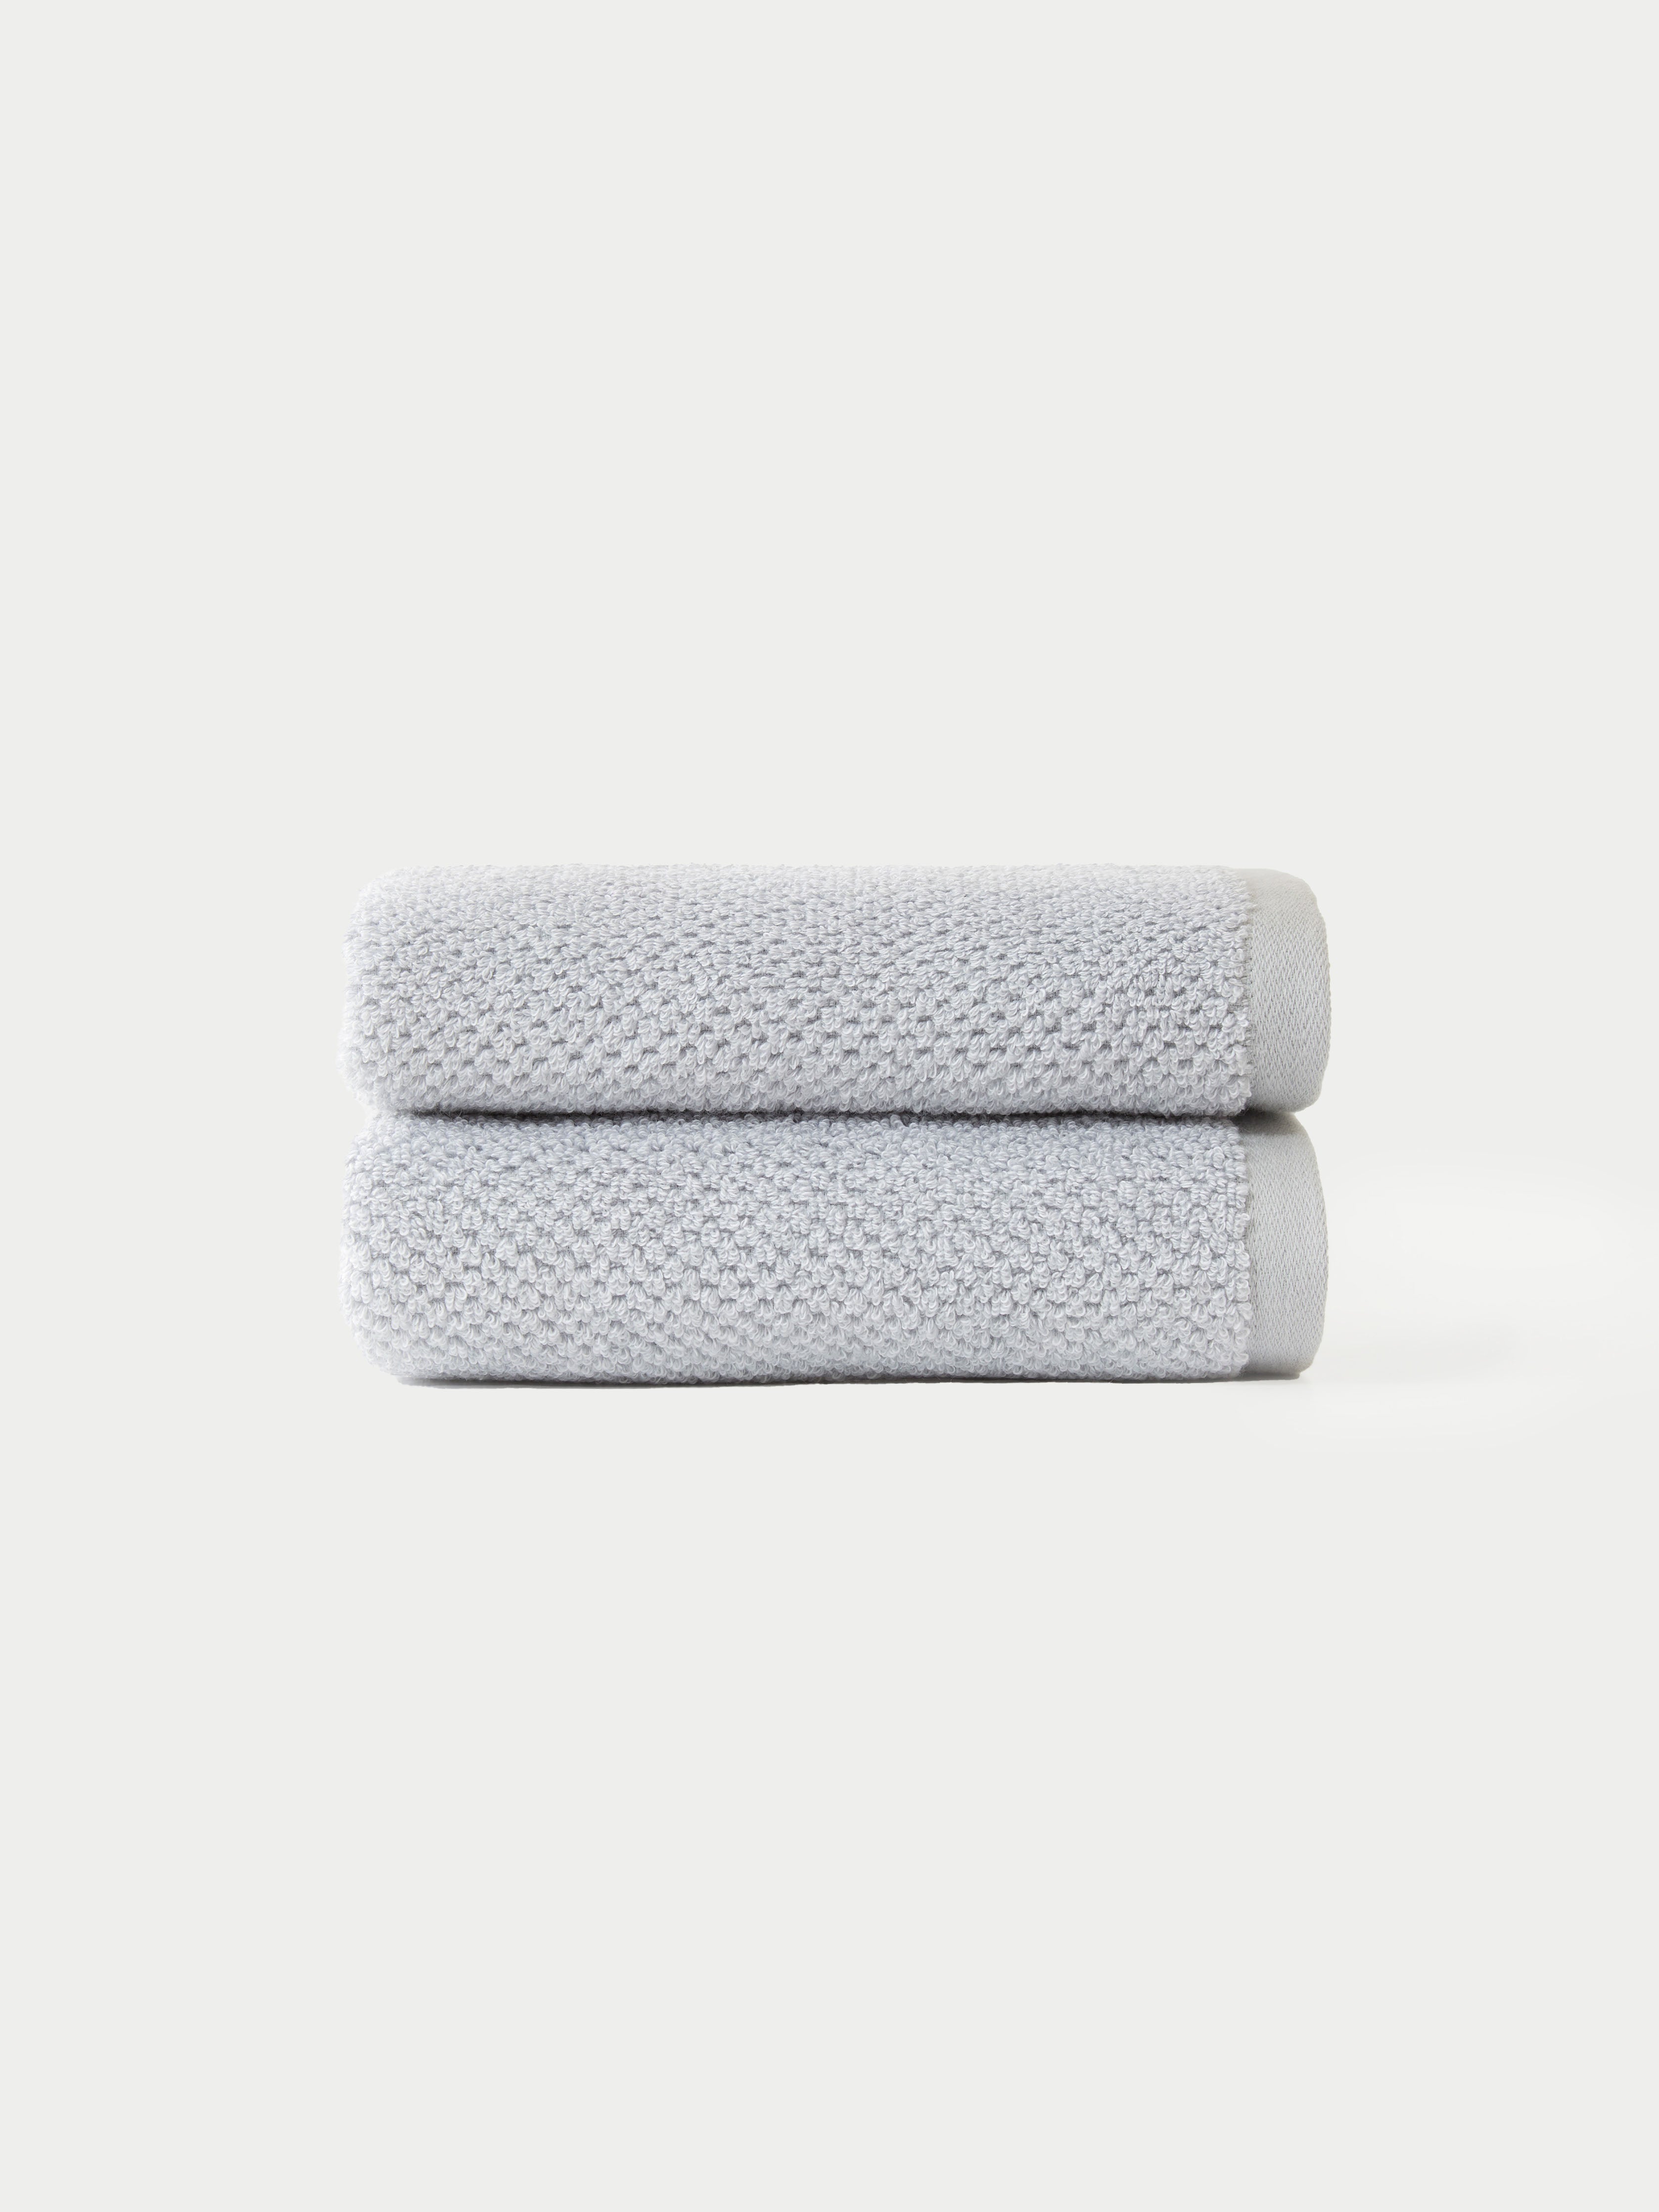 Nantucket Hand Towels in the color Heathered Harbor Mist. The Hand Towels are neatly folded. The photo of the Hand Towels was taken with a white background.|Color:Heathered Harbor Mist